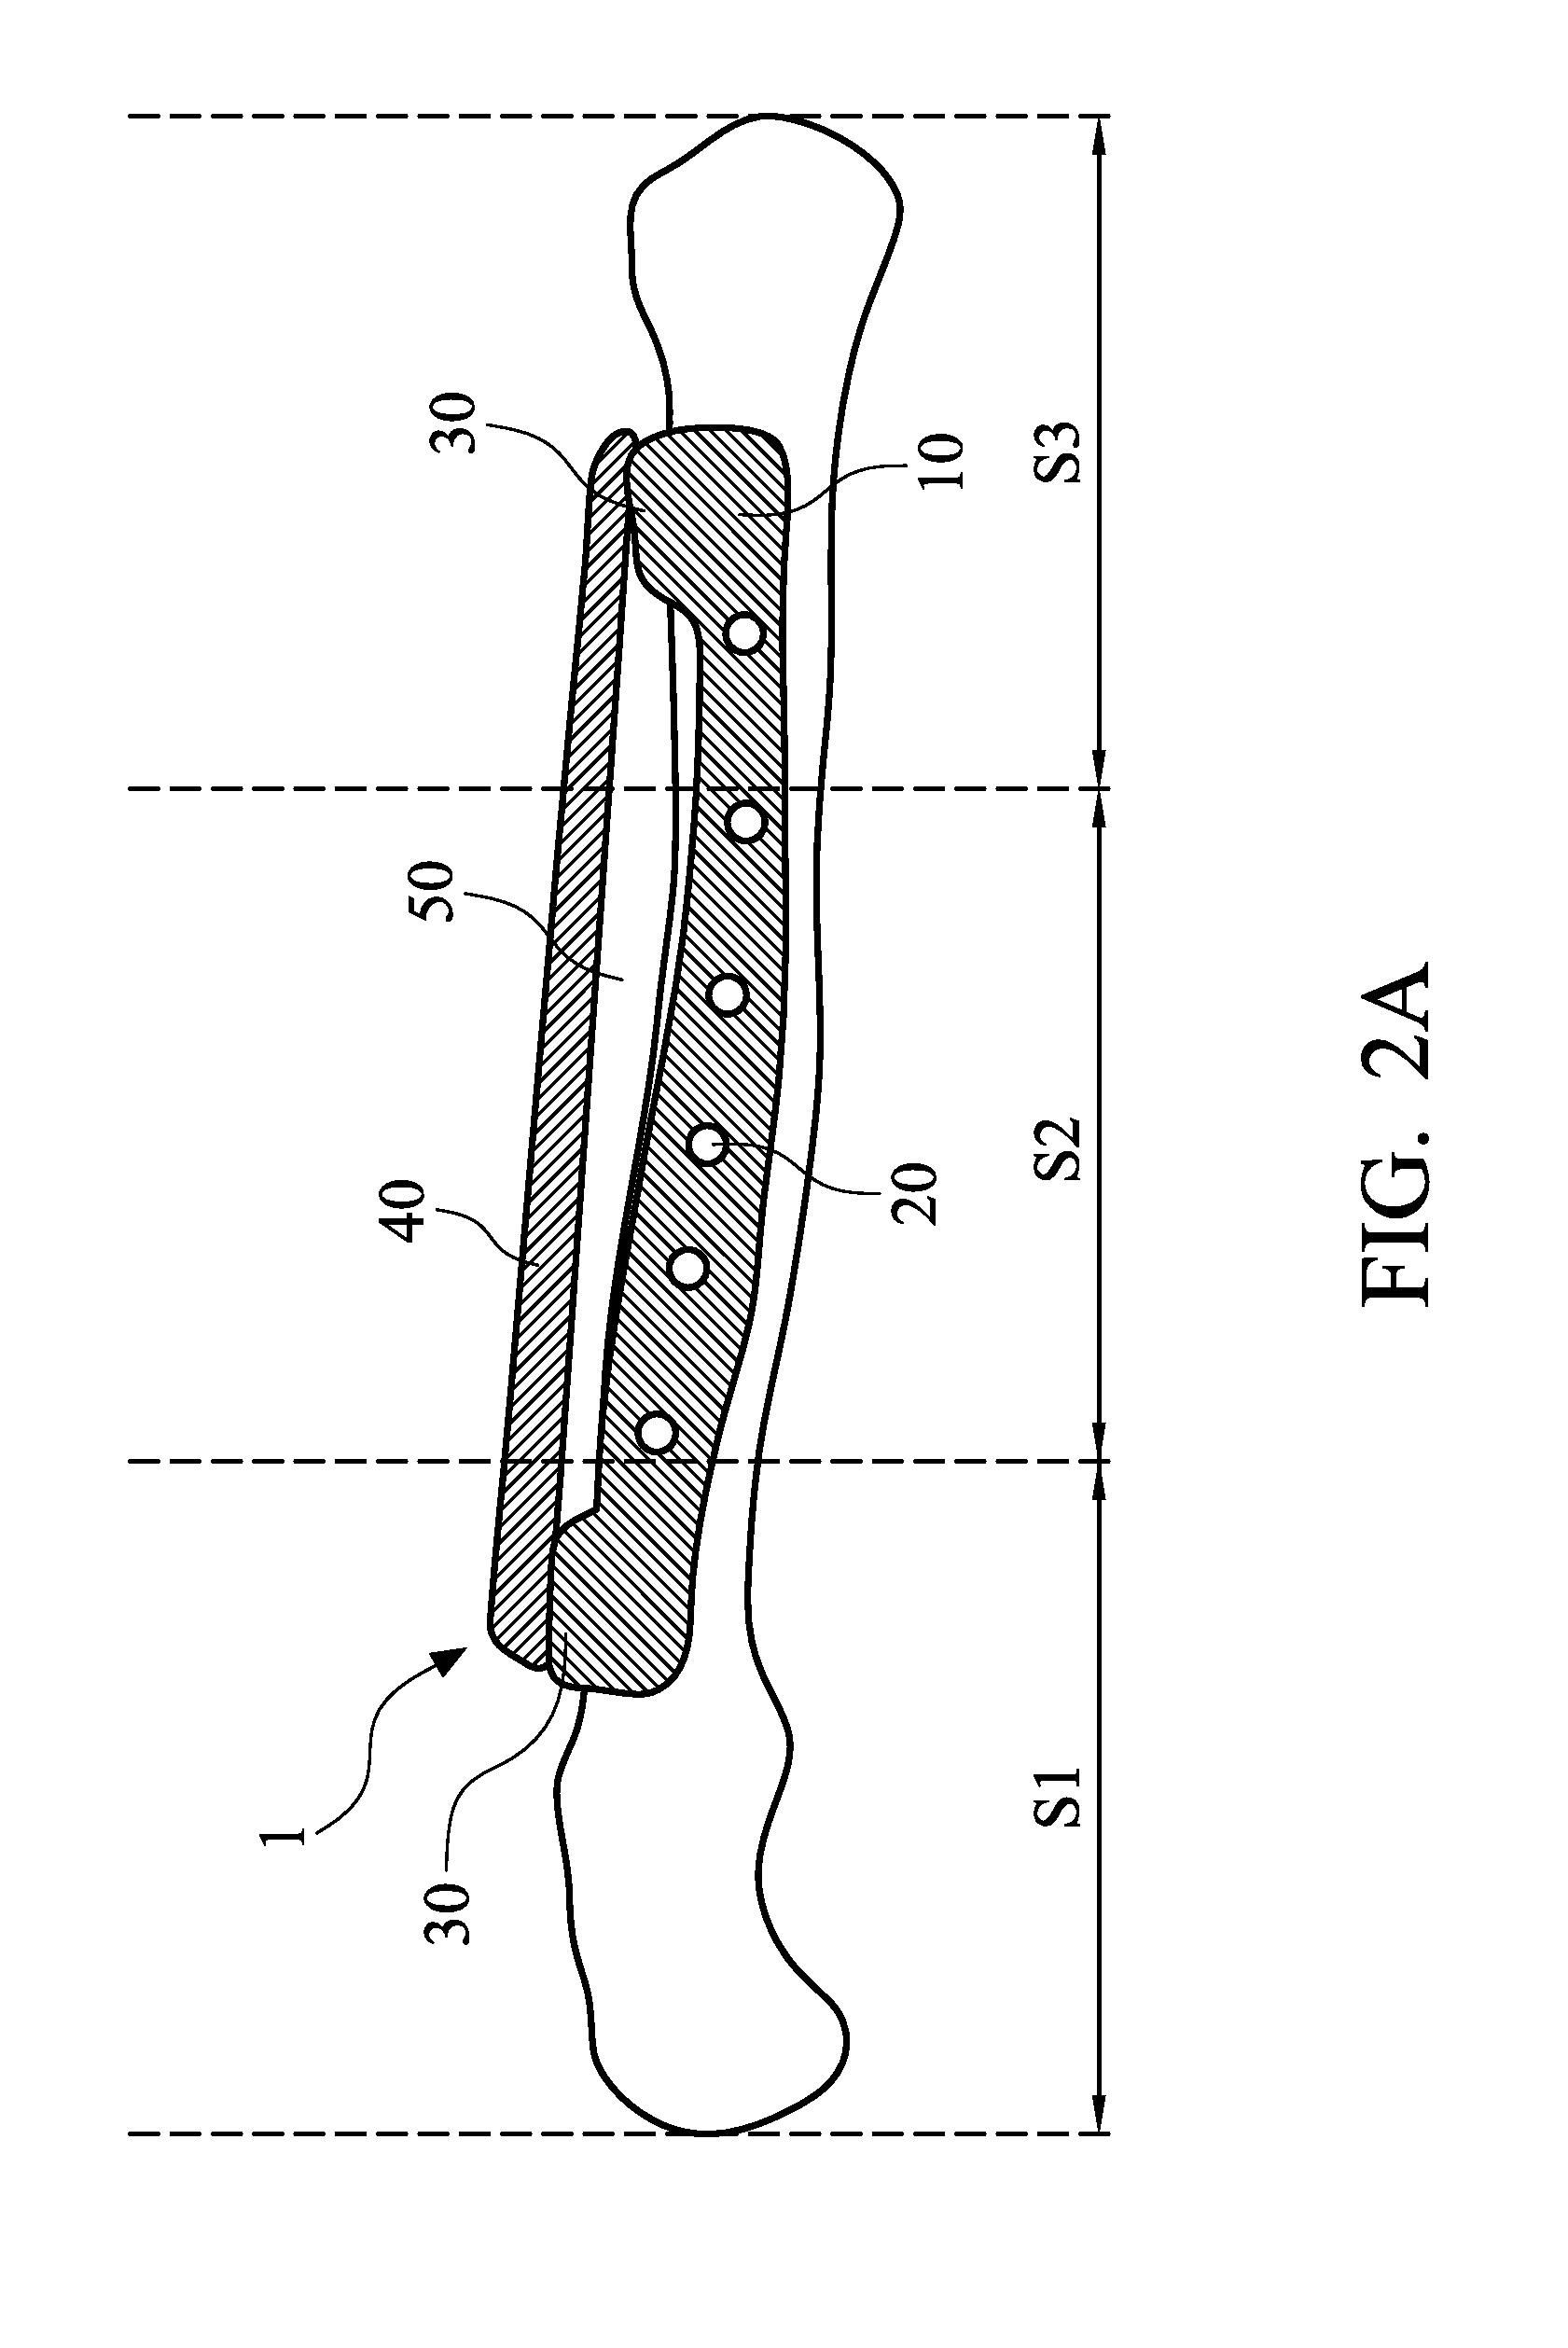 Three-dimensional fracture fixation device for nerve protection